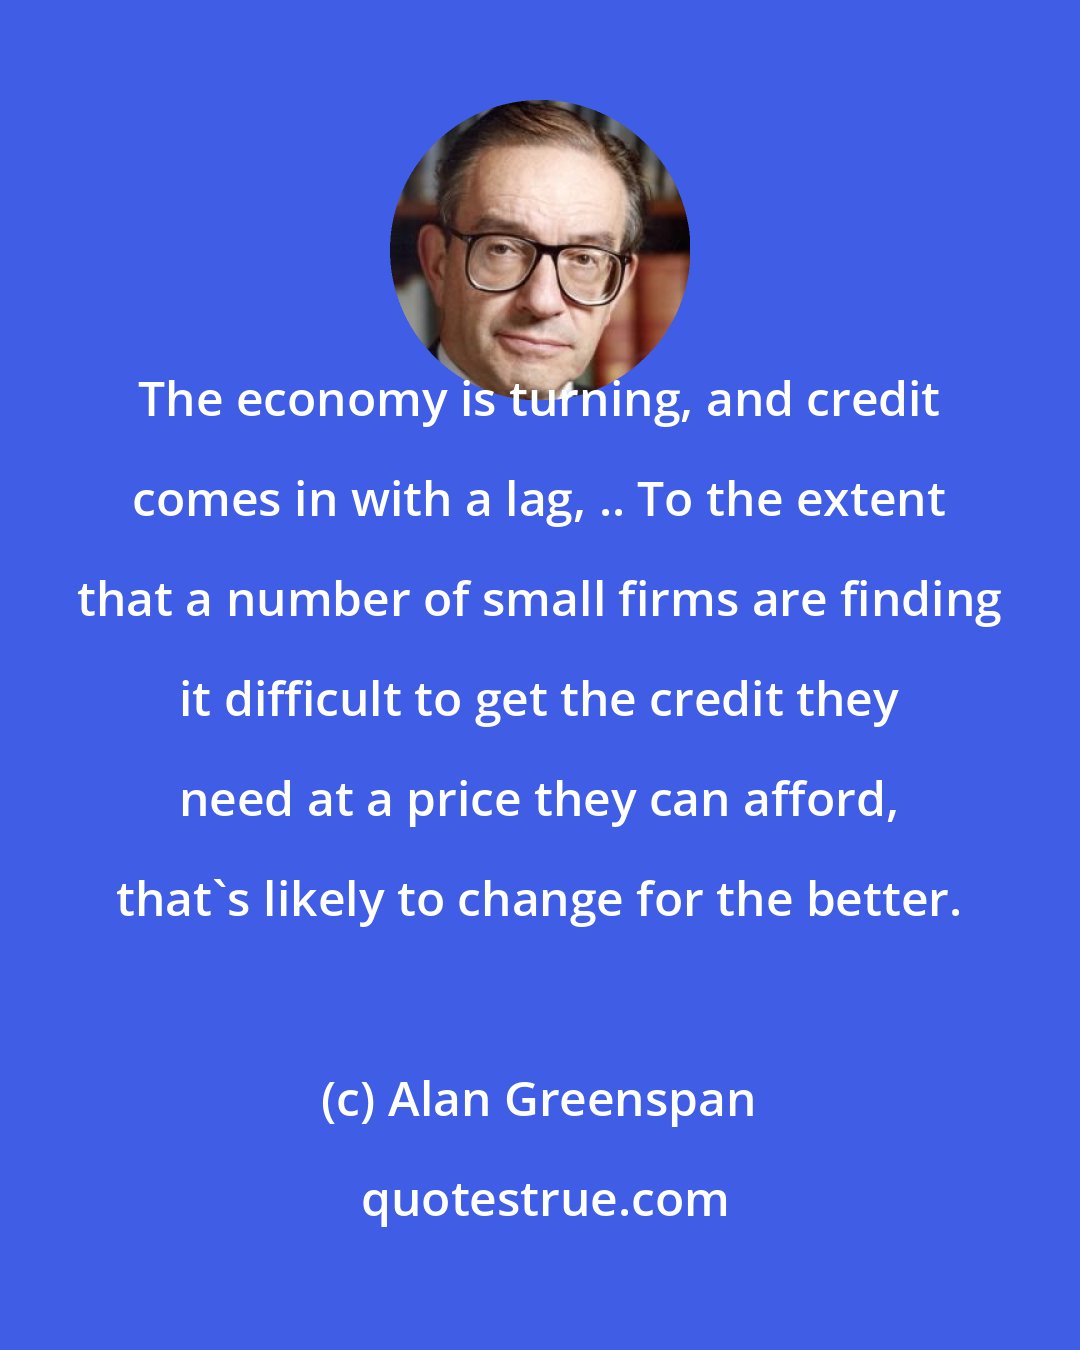 Alan Greenspan: The economy is turning, and credit comes in with a lag, .. To the extent that a number of small firms are finding it difficult to get the credit they need at a price they can afford, that's likely to change for the better.